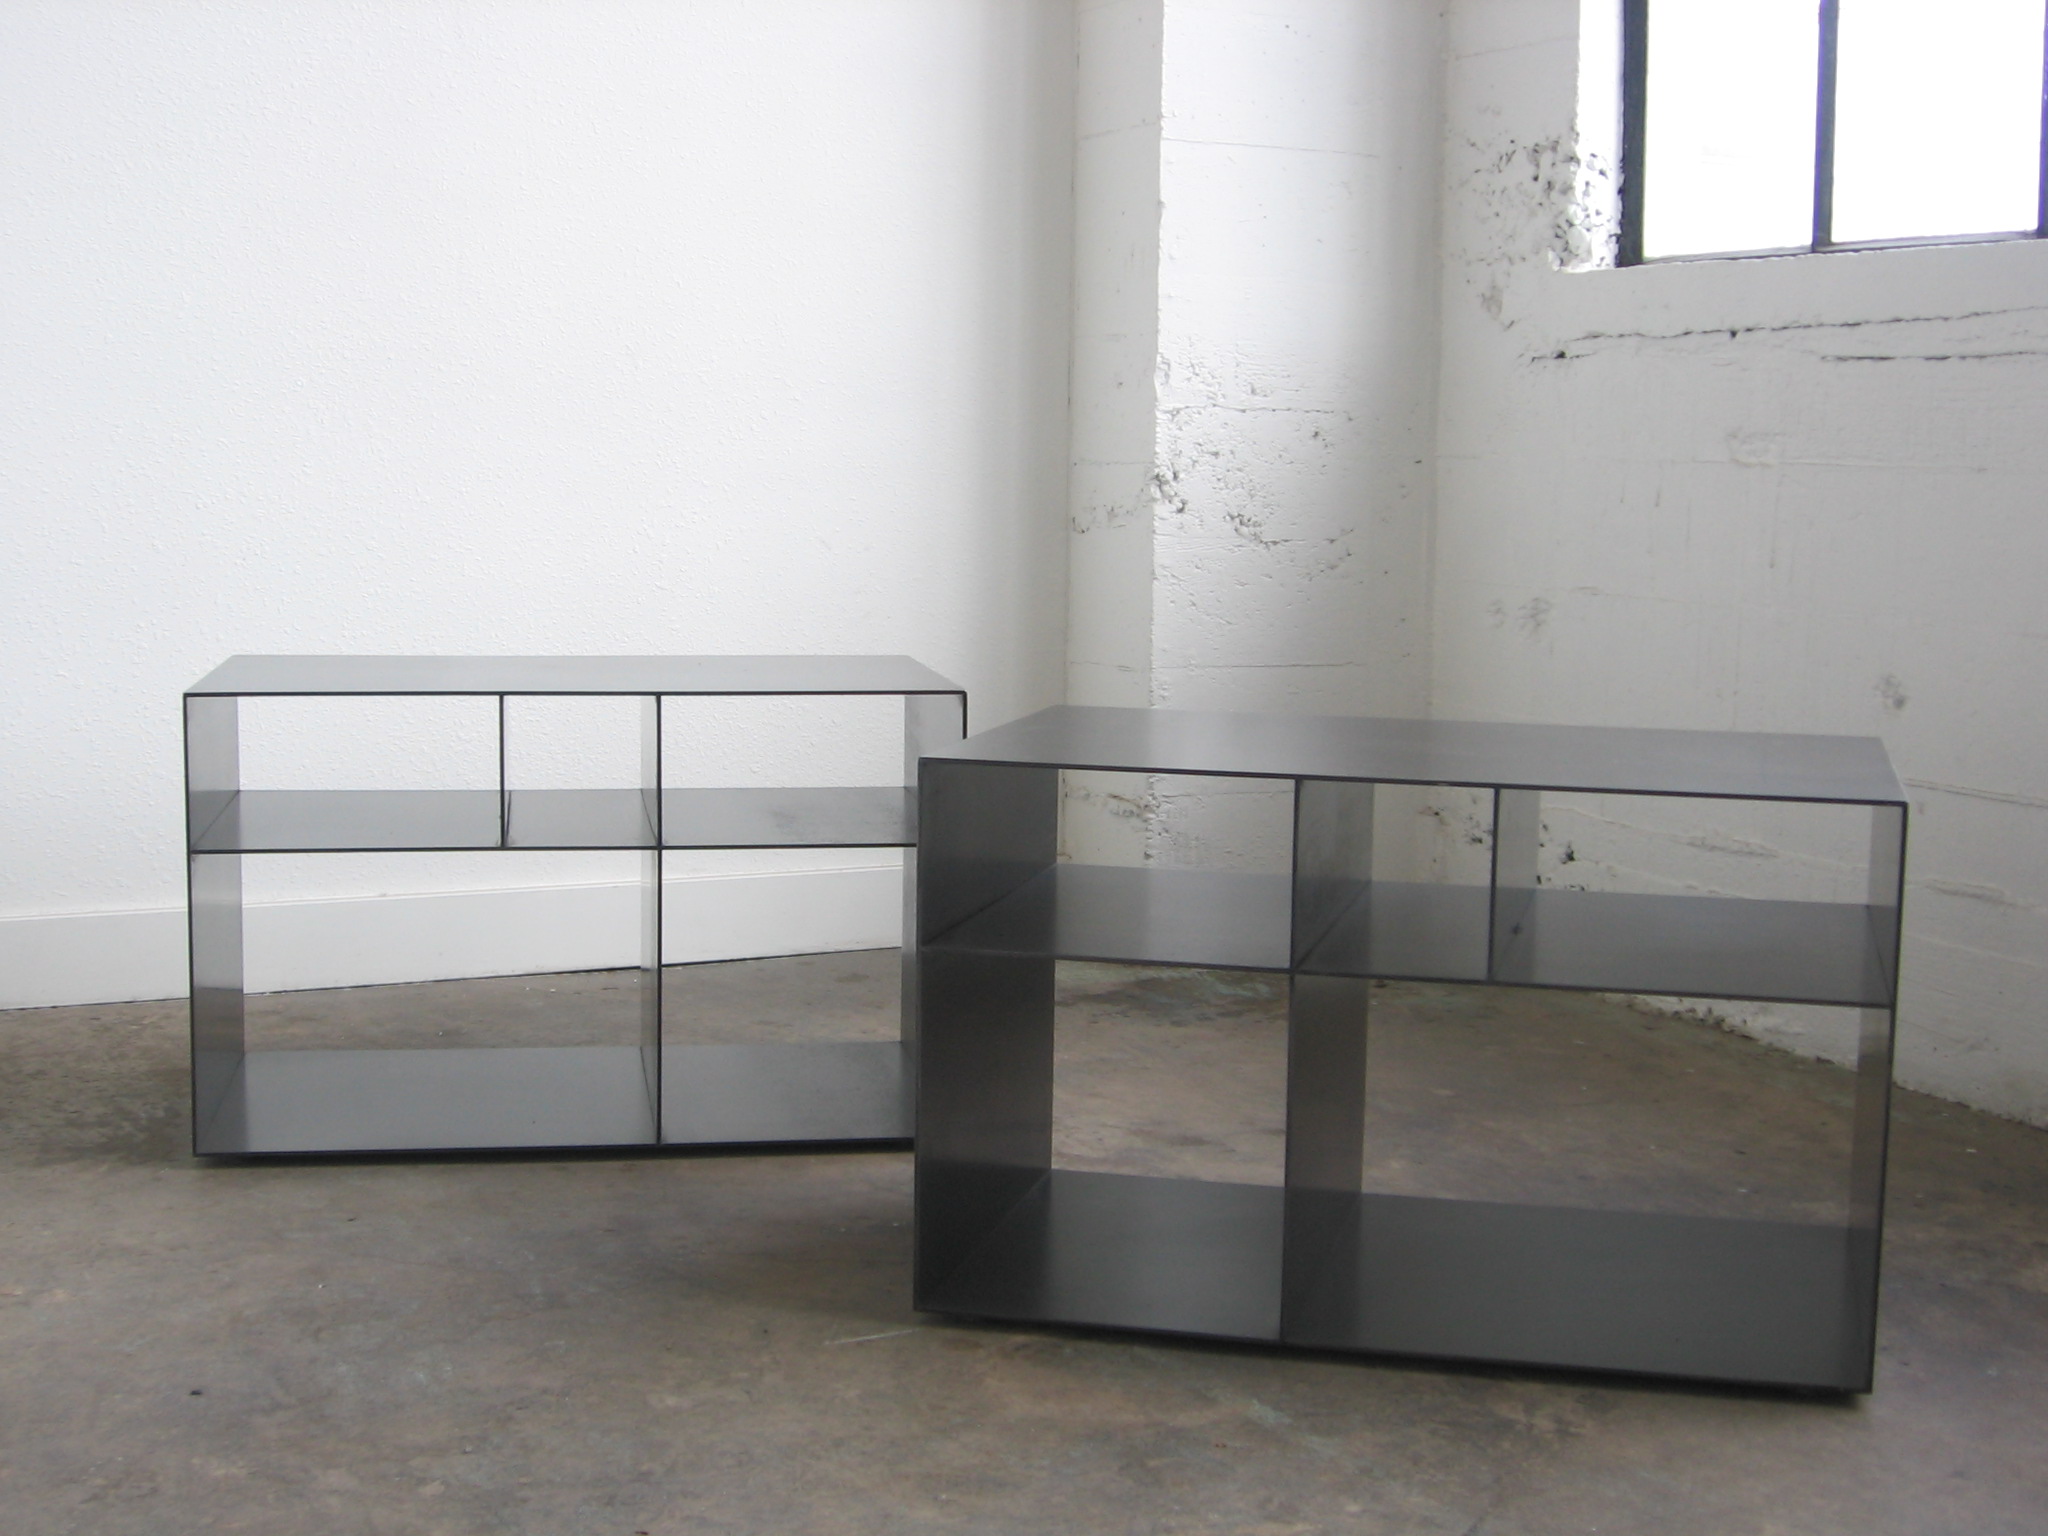  Hot Rolled Steel Shelves.  Designed by Eggleston/Farkas Architecture 